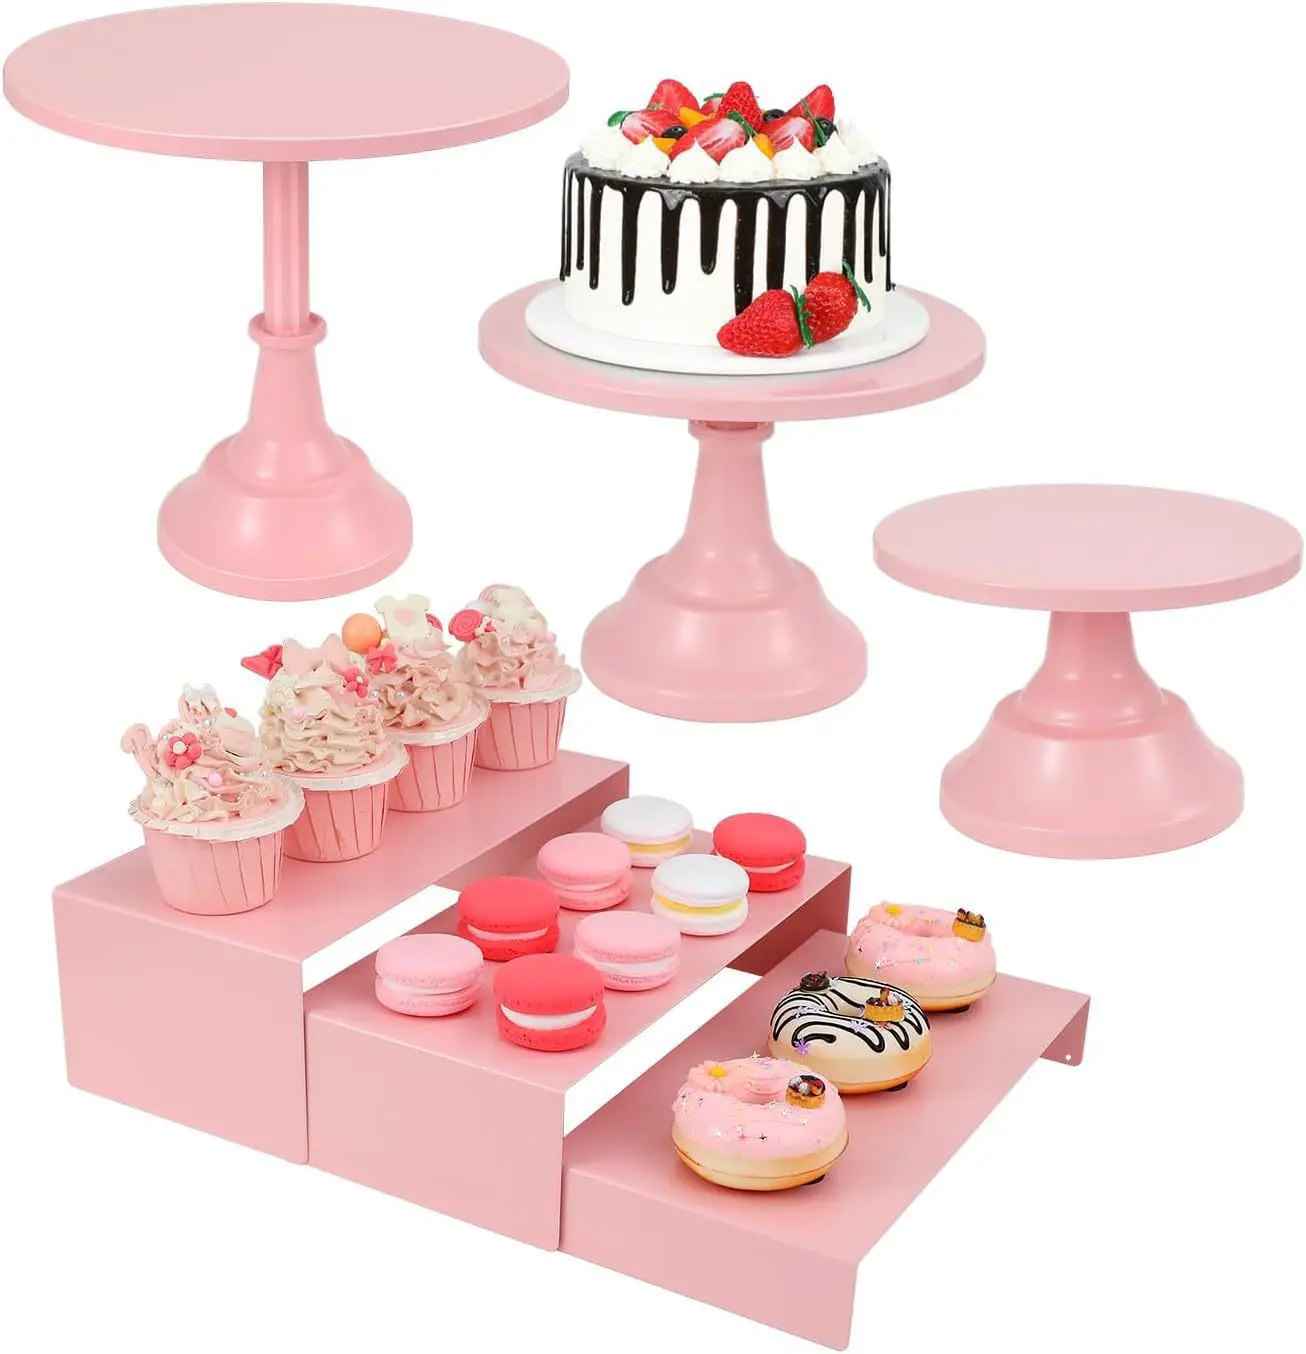 New arrivals 6pcs set gold cakes stand cake decorating  reposteria birthday party dessert table stands afternoon tea snack rack